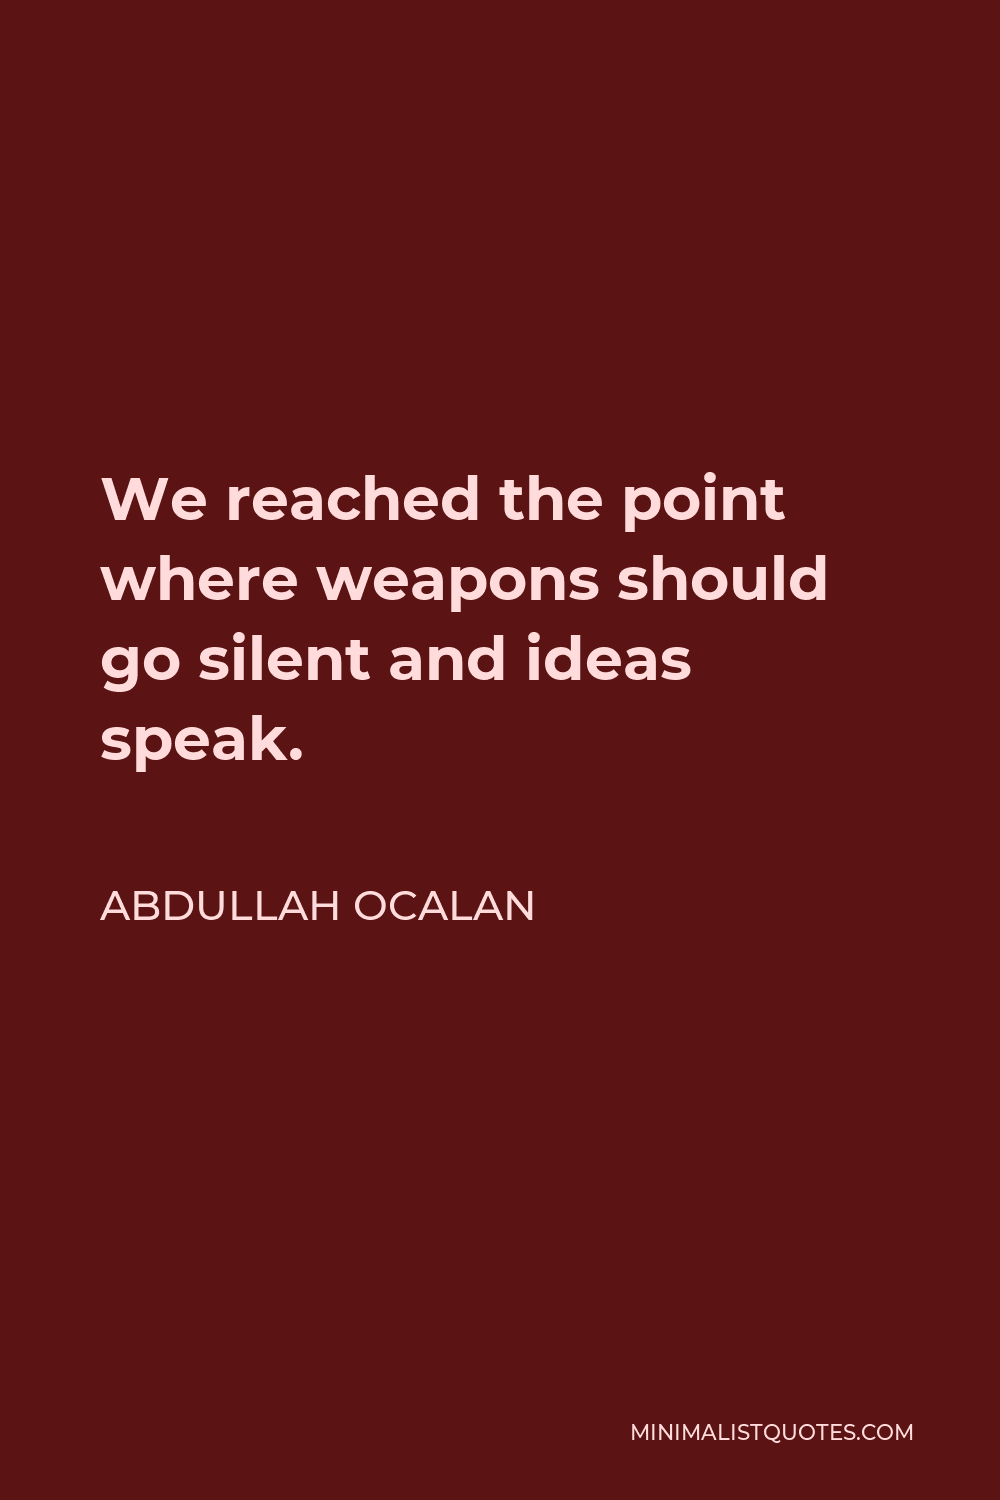 Abdullah Ocalan Quote - We reached the point where weapons should go silent and ideas speak.